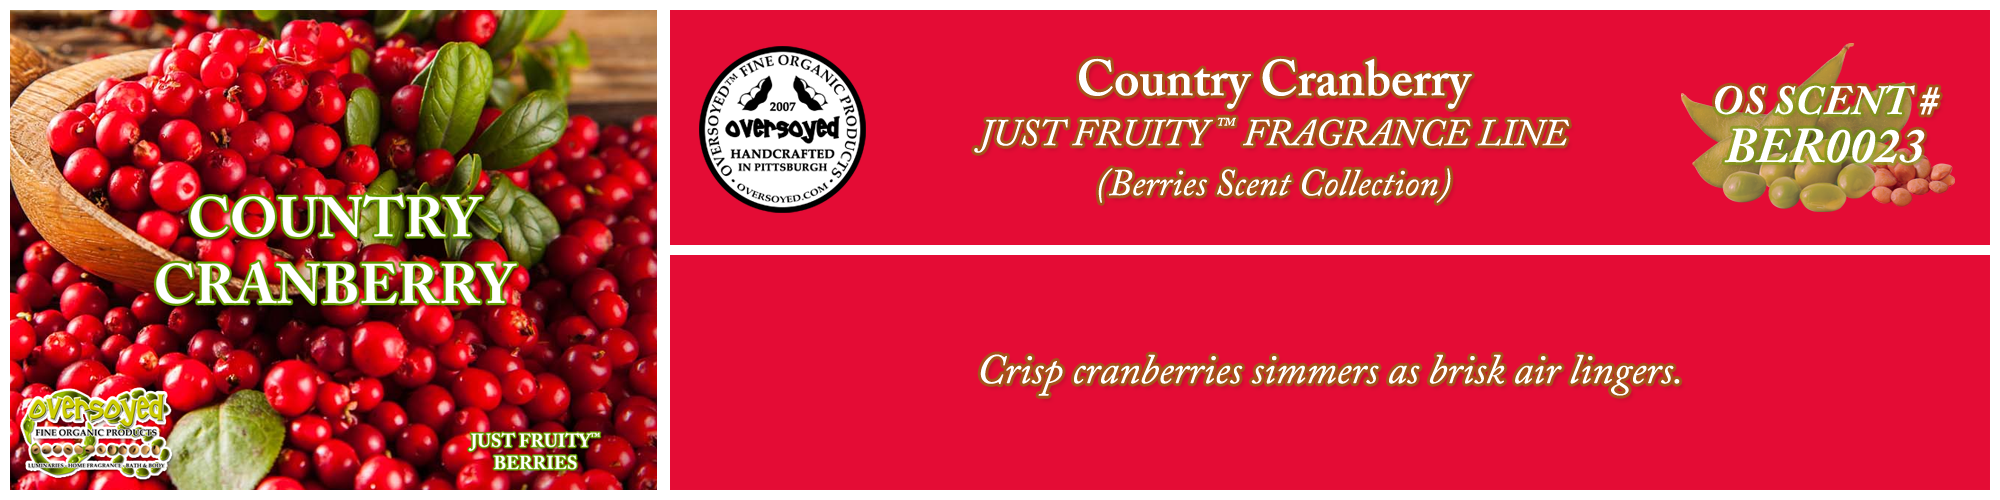 Country Cranberry Handcrafted Products Collection